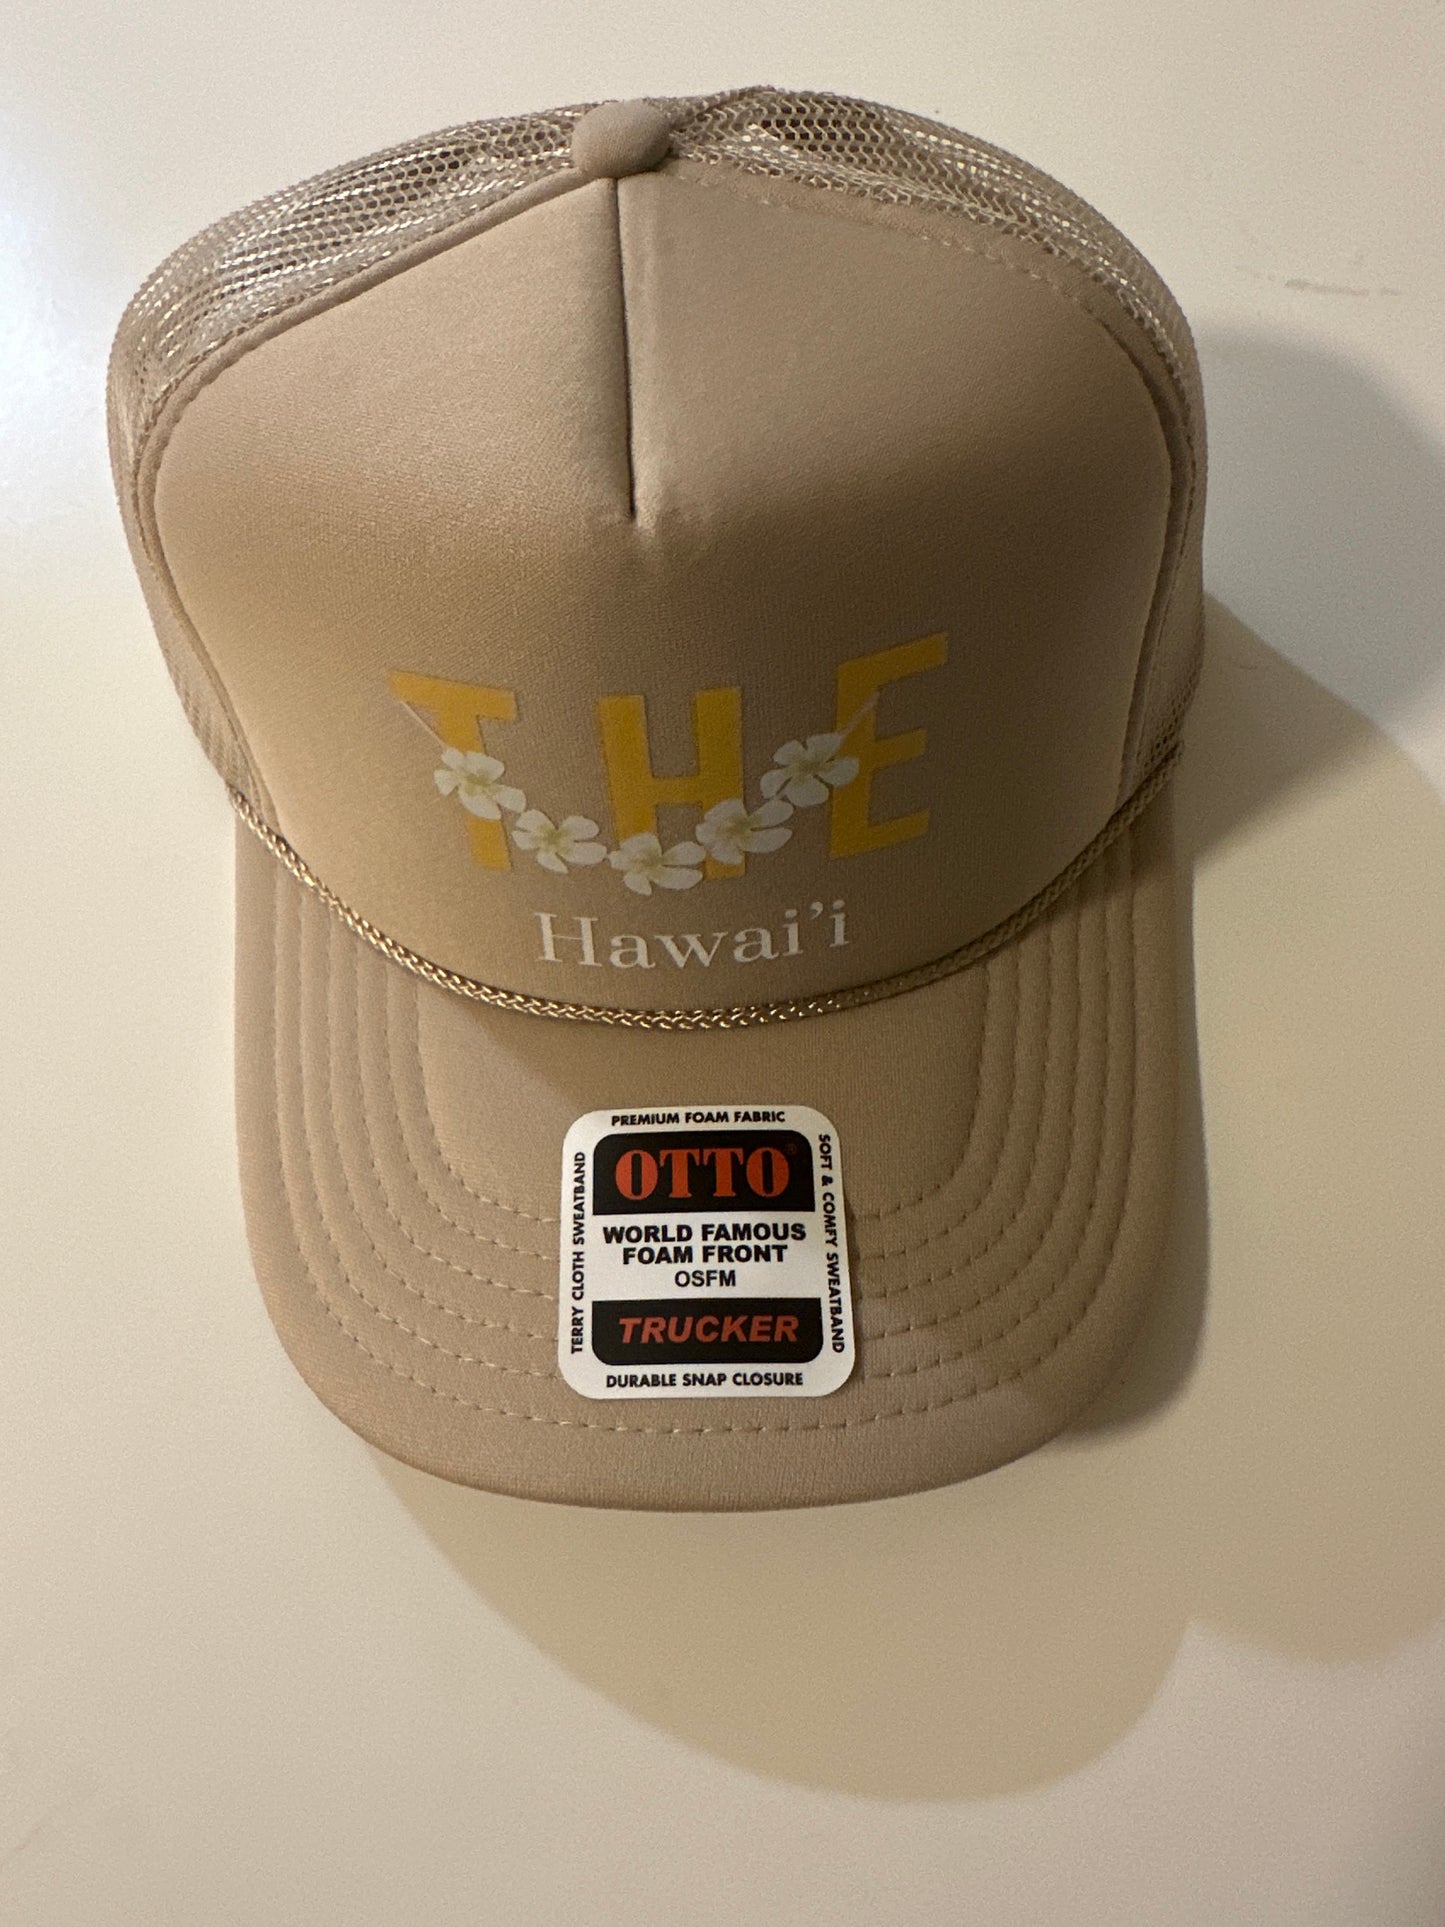 THE Lei Hat